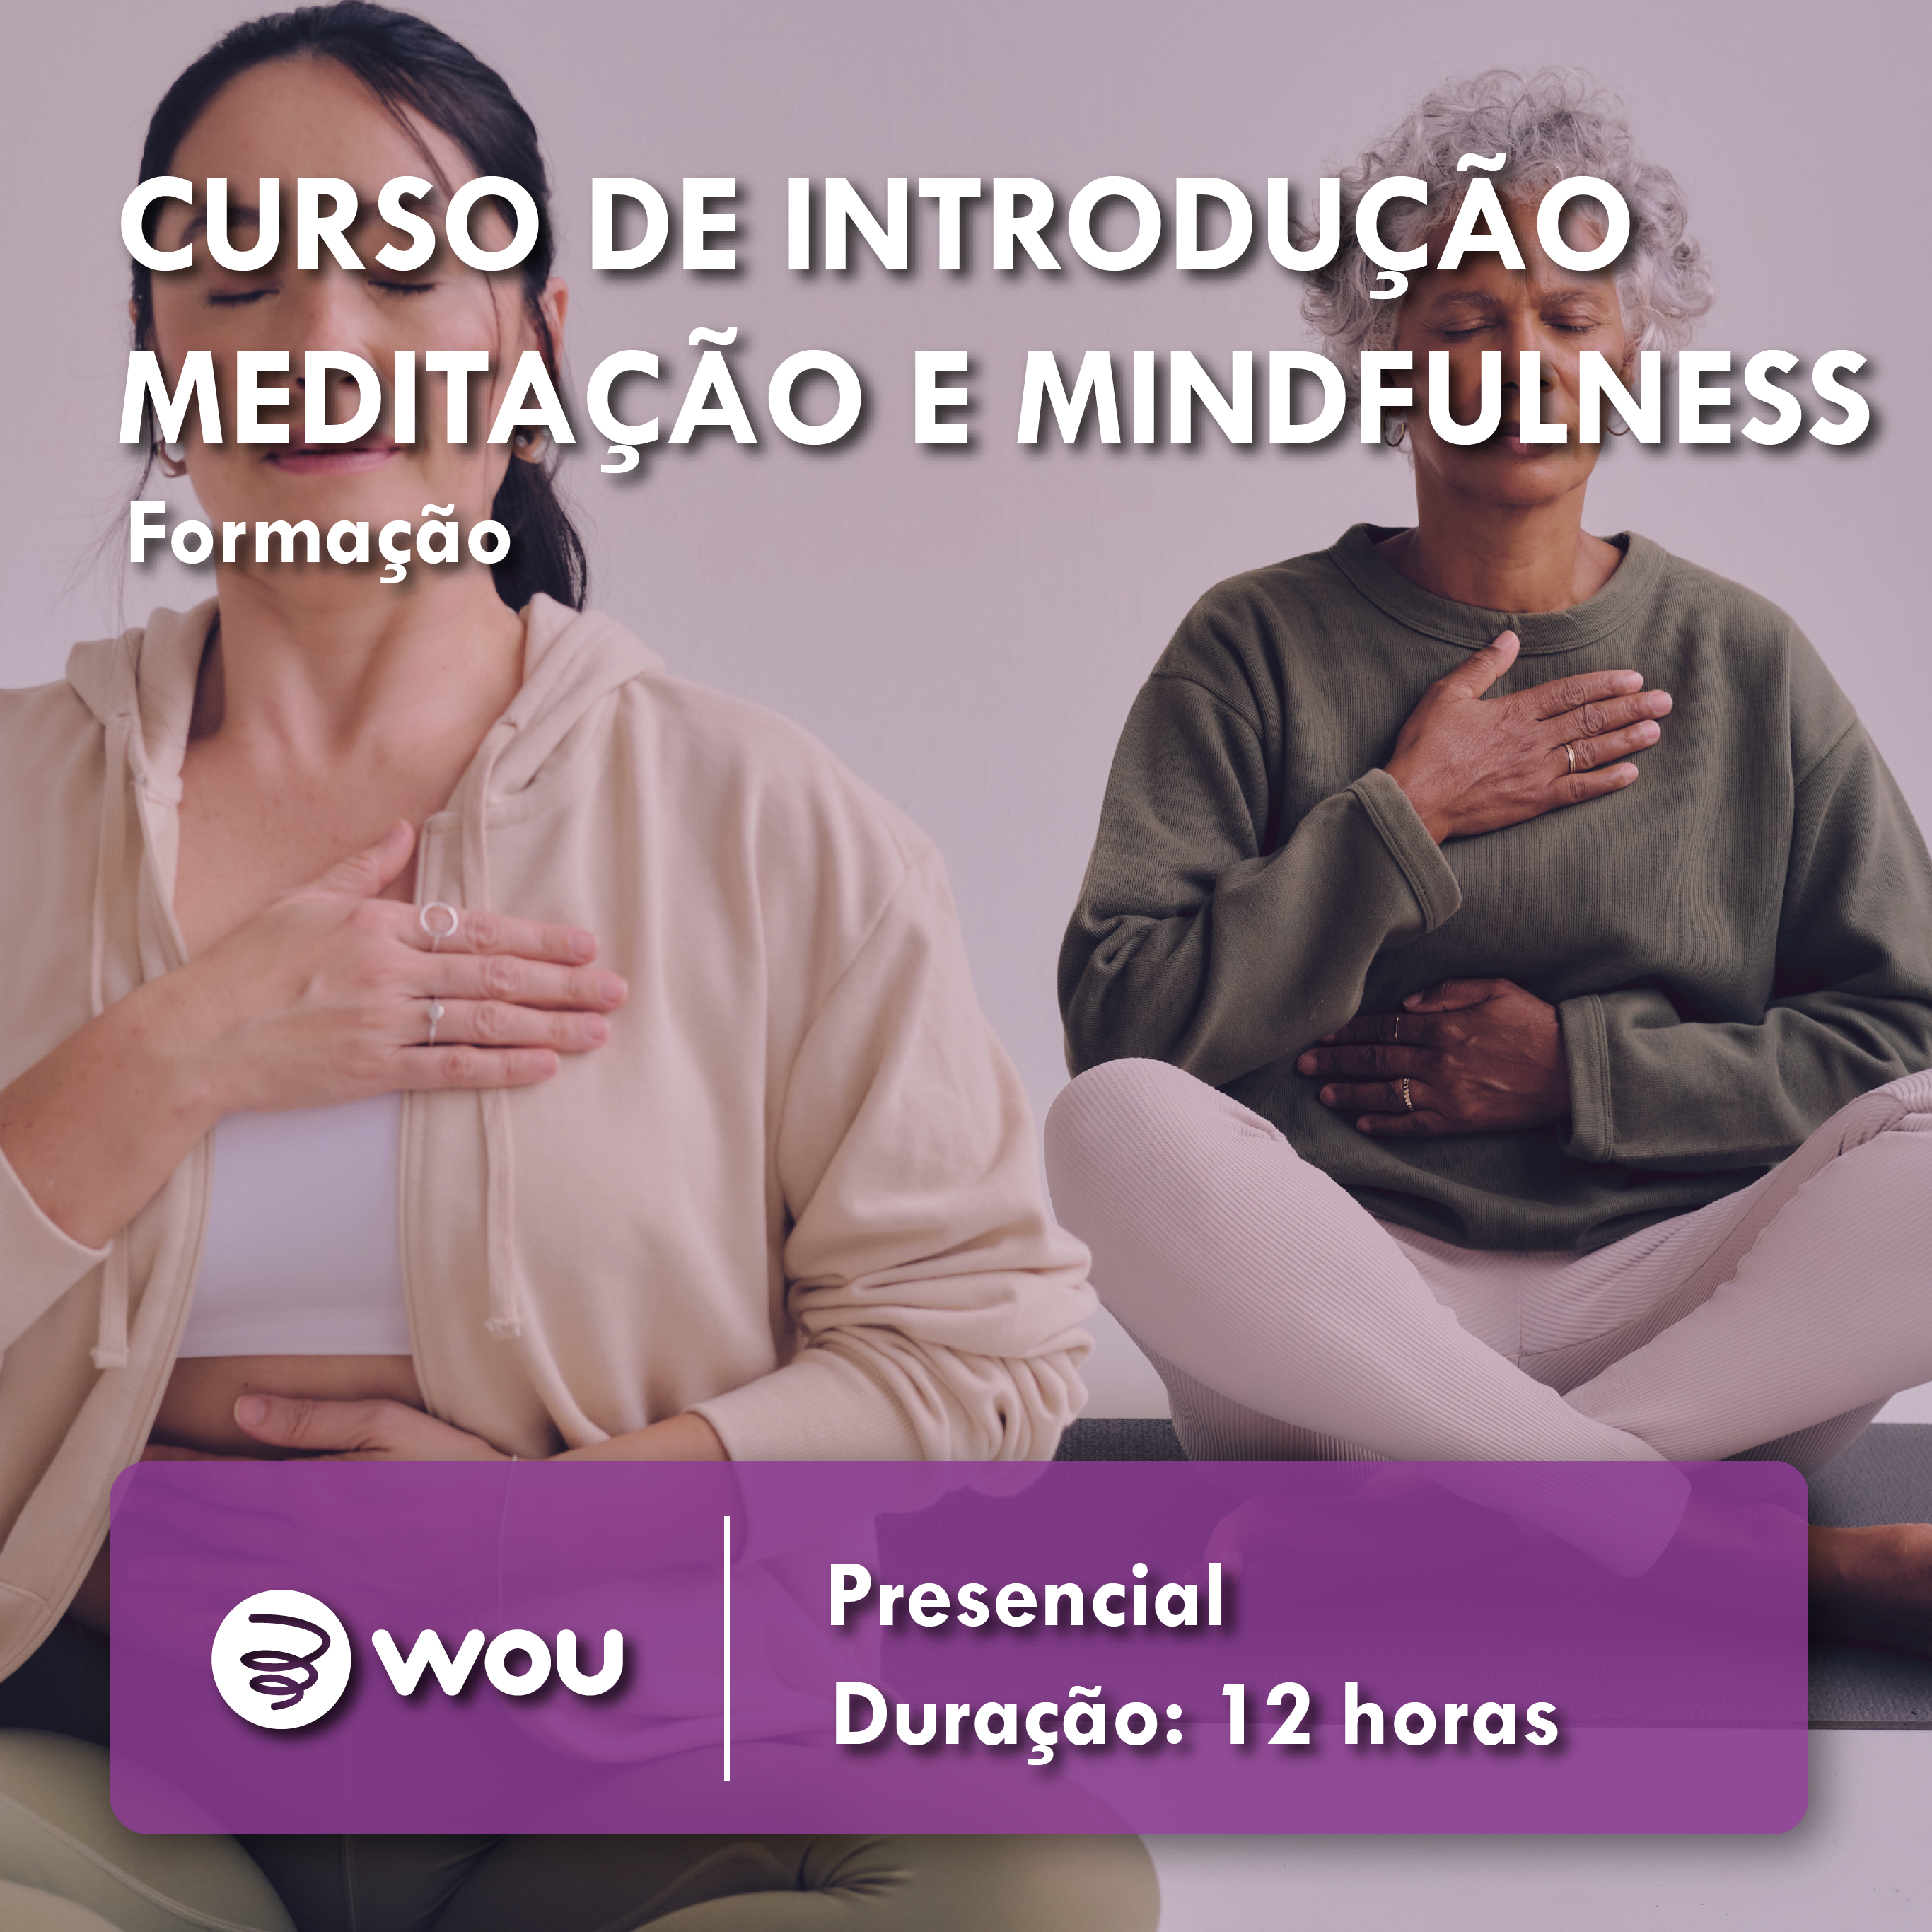 Introduction to Meditation and Mindfulness Course in Figueira da Foz